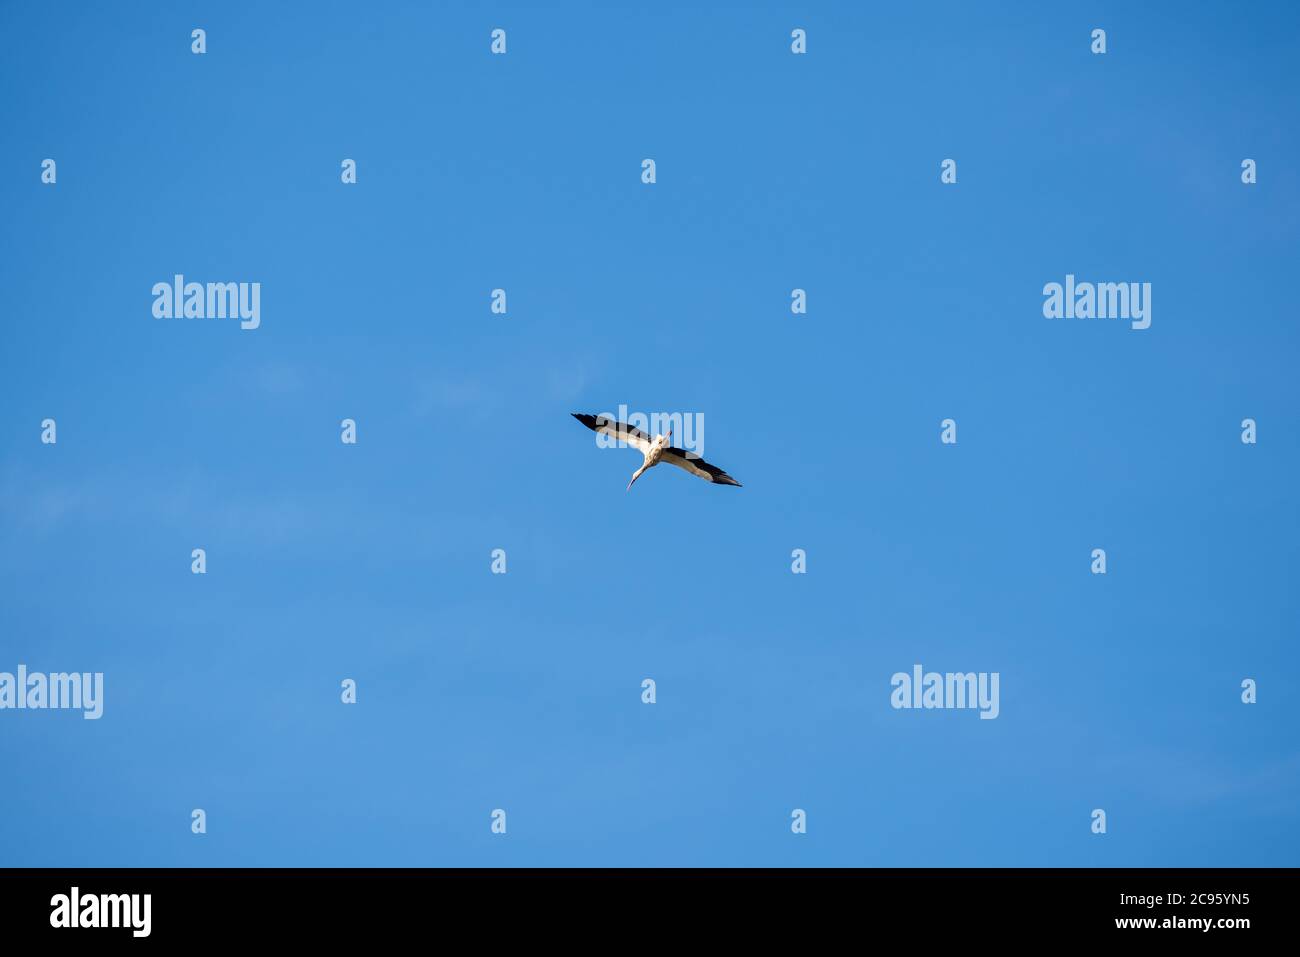 one stork flying in the blue sky, independence, freedom of choice, movement and action Stock Photo